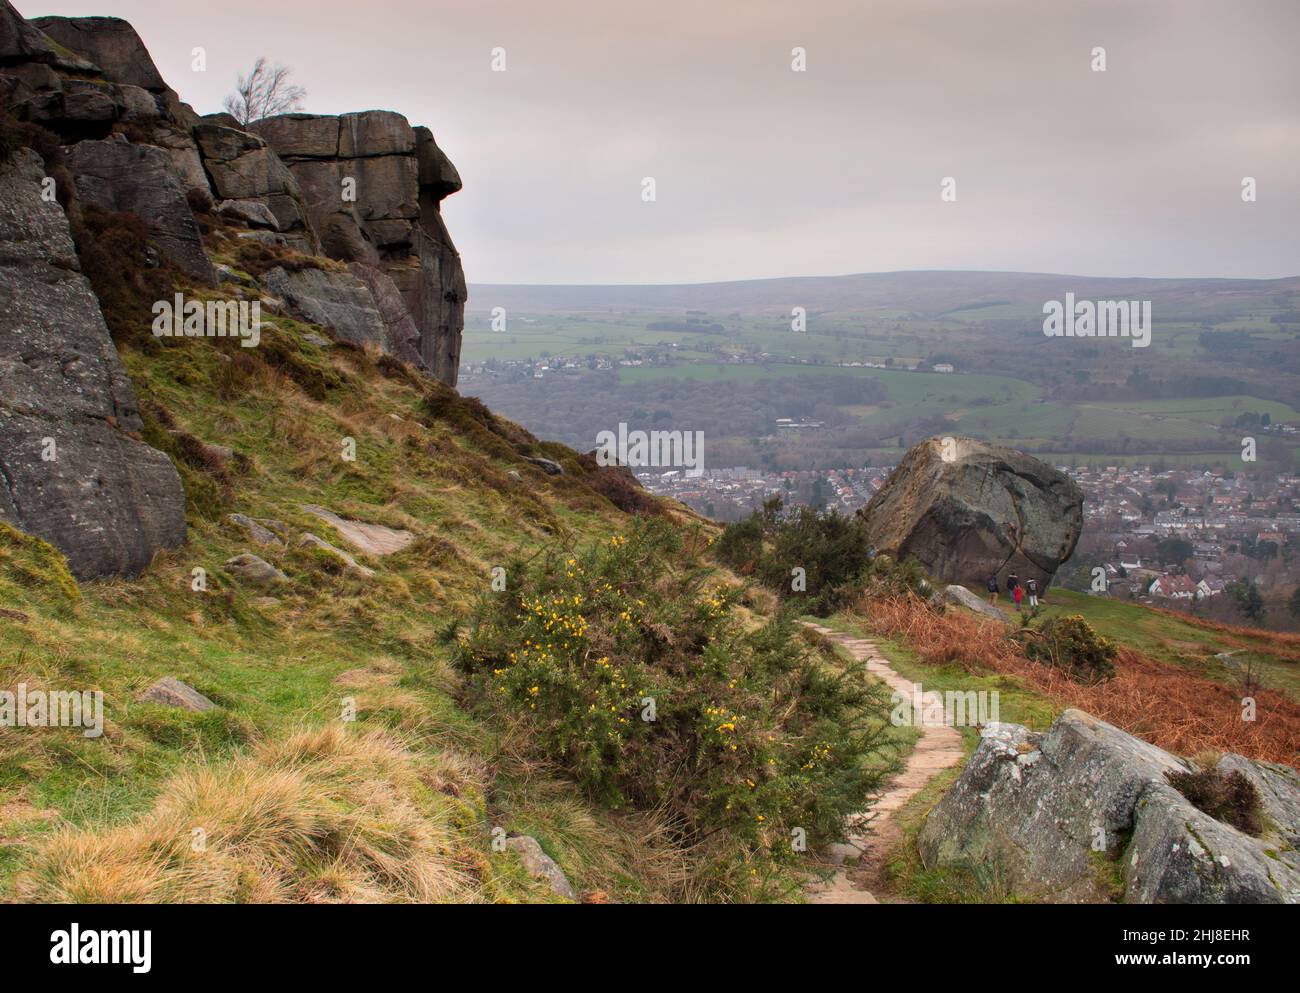 A small group of people around the 'calf' - the smaller of the two rocks in the famous Cow and Calf rock formation, Ilkley, Yorkshire, UK Stock Photo